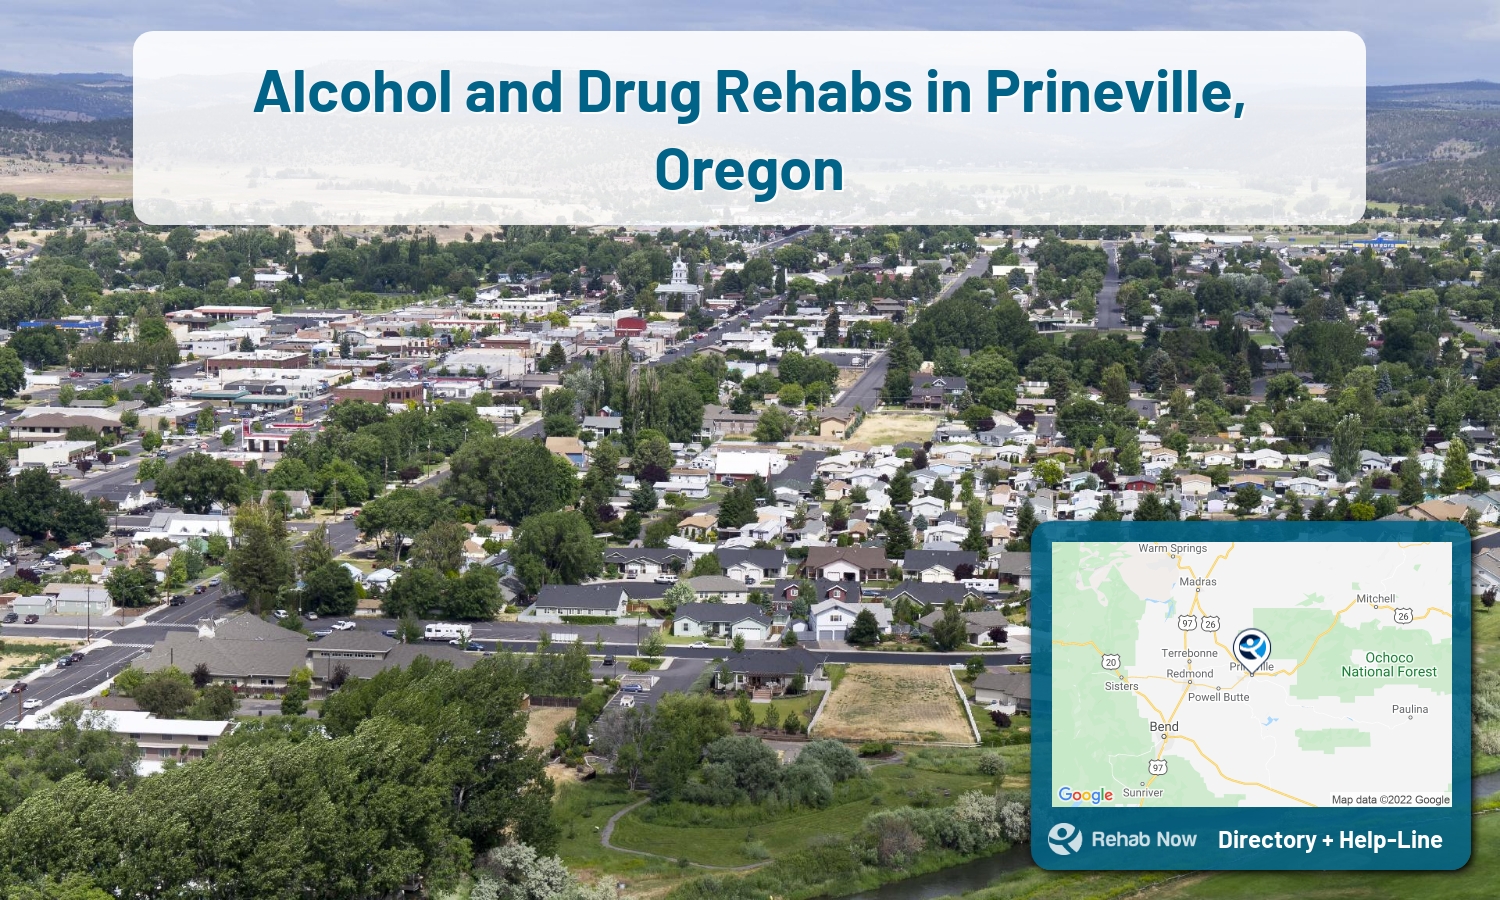 Prineville, OR Treatment Centers. Find drug rehab in Prineville, Oregon, or detox and treatment programs. Get the right help now!